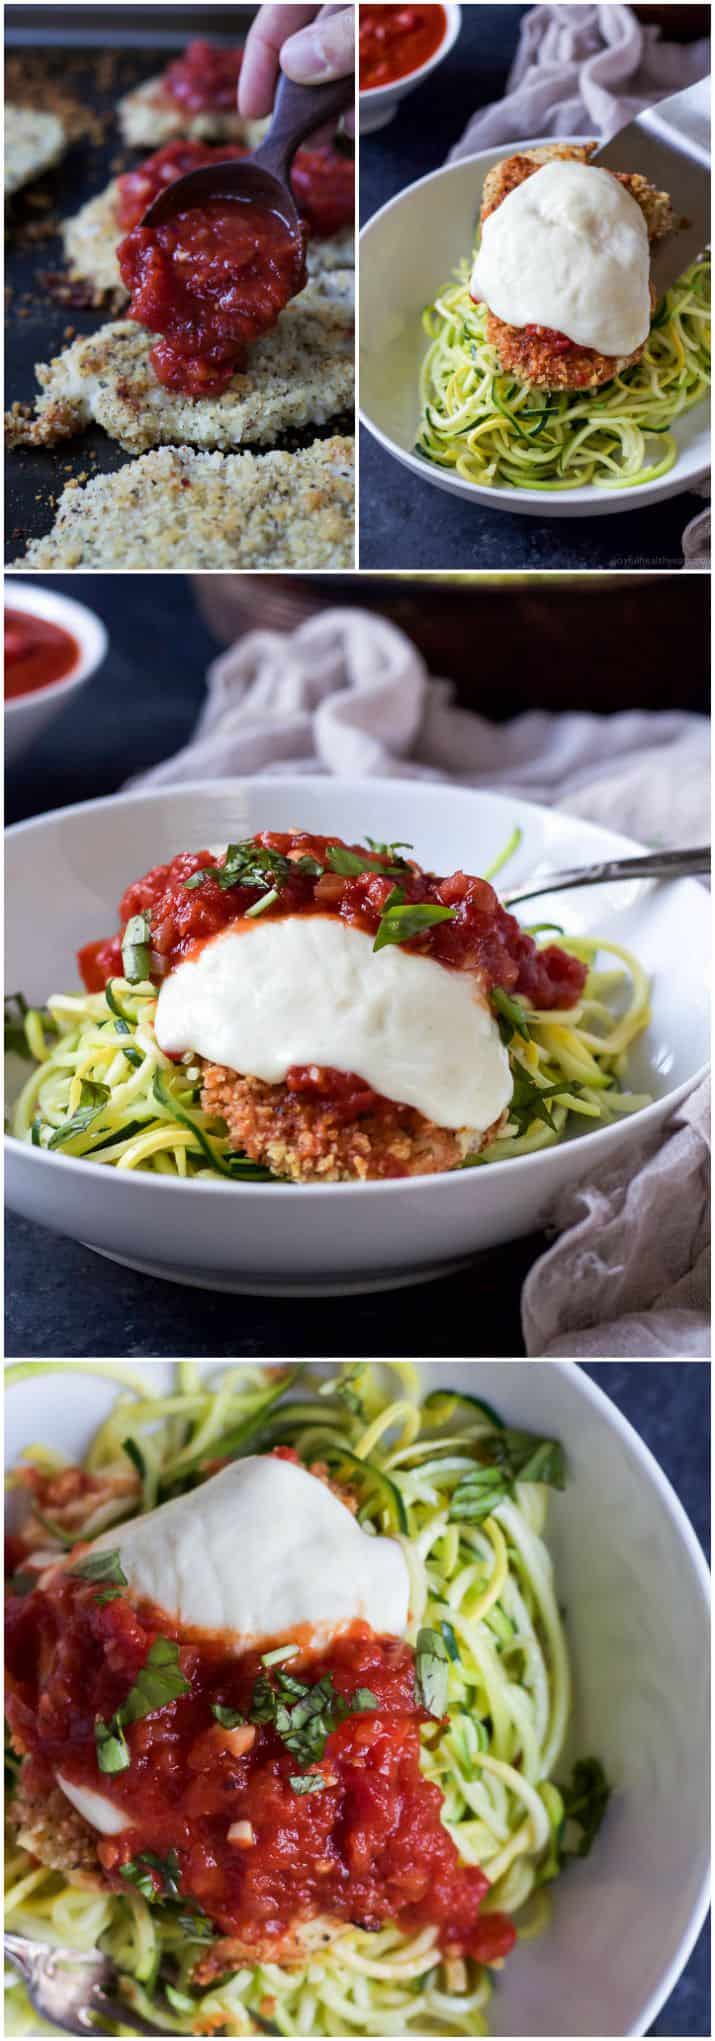 Lighter Baked Chicken Parmesan with Zucchini Noodles, your family will adore this lightened up twist on a classic. Only 387 calories a serving! Healthy comfort food is the best comfort food!| joyfulhealthyeats.com #zoodles